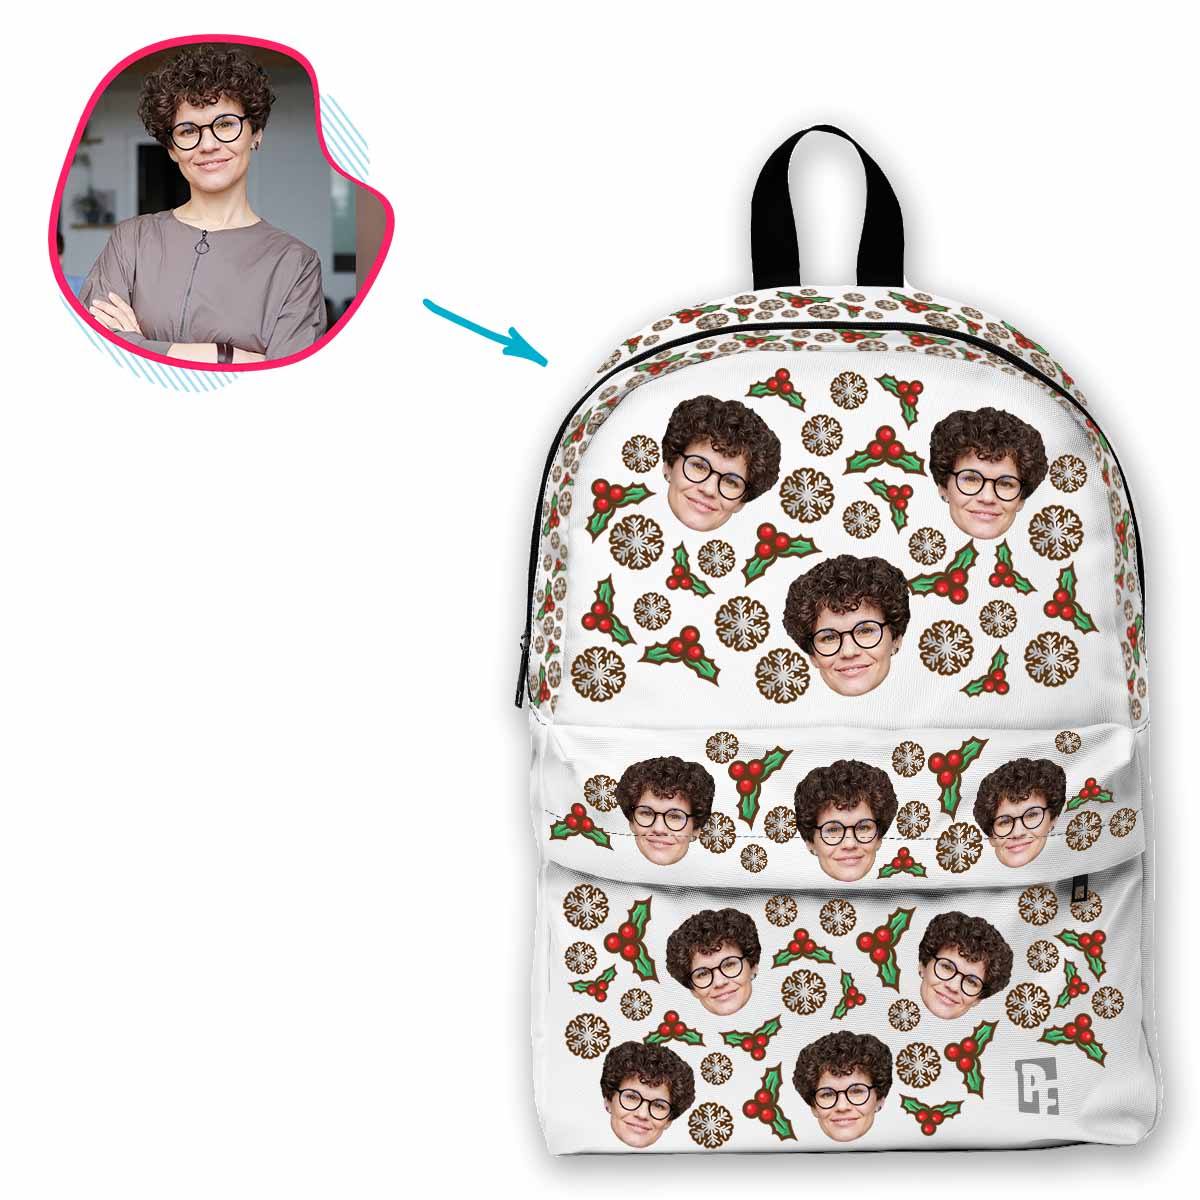 white Mistletoe classic backpack personalized with photo of face printed on it